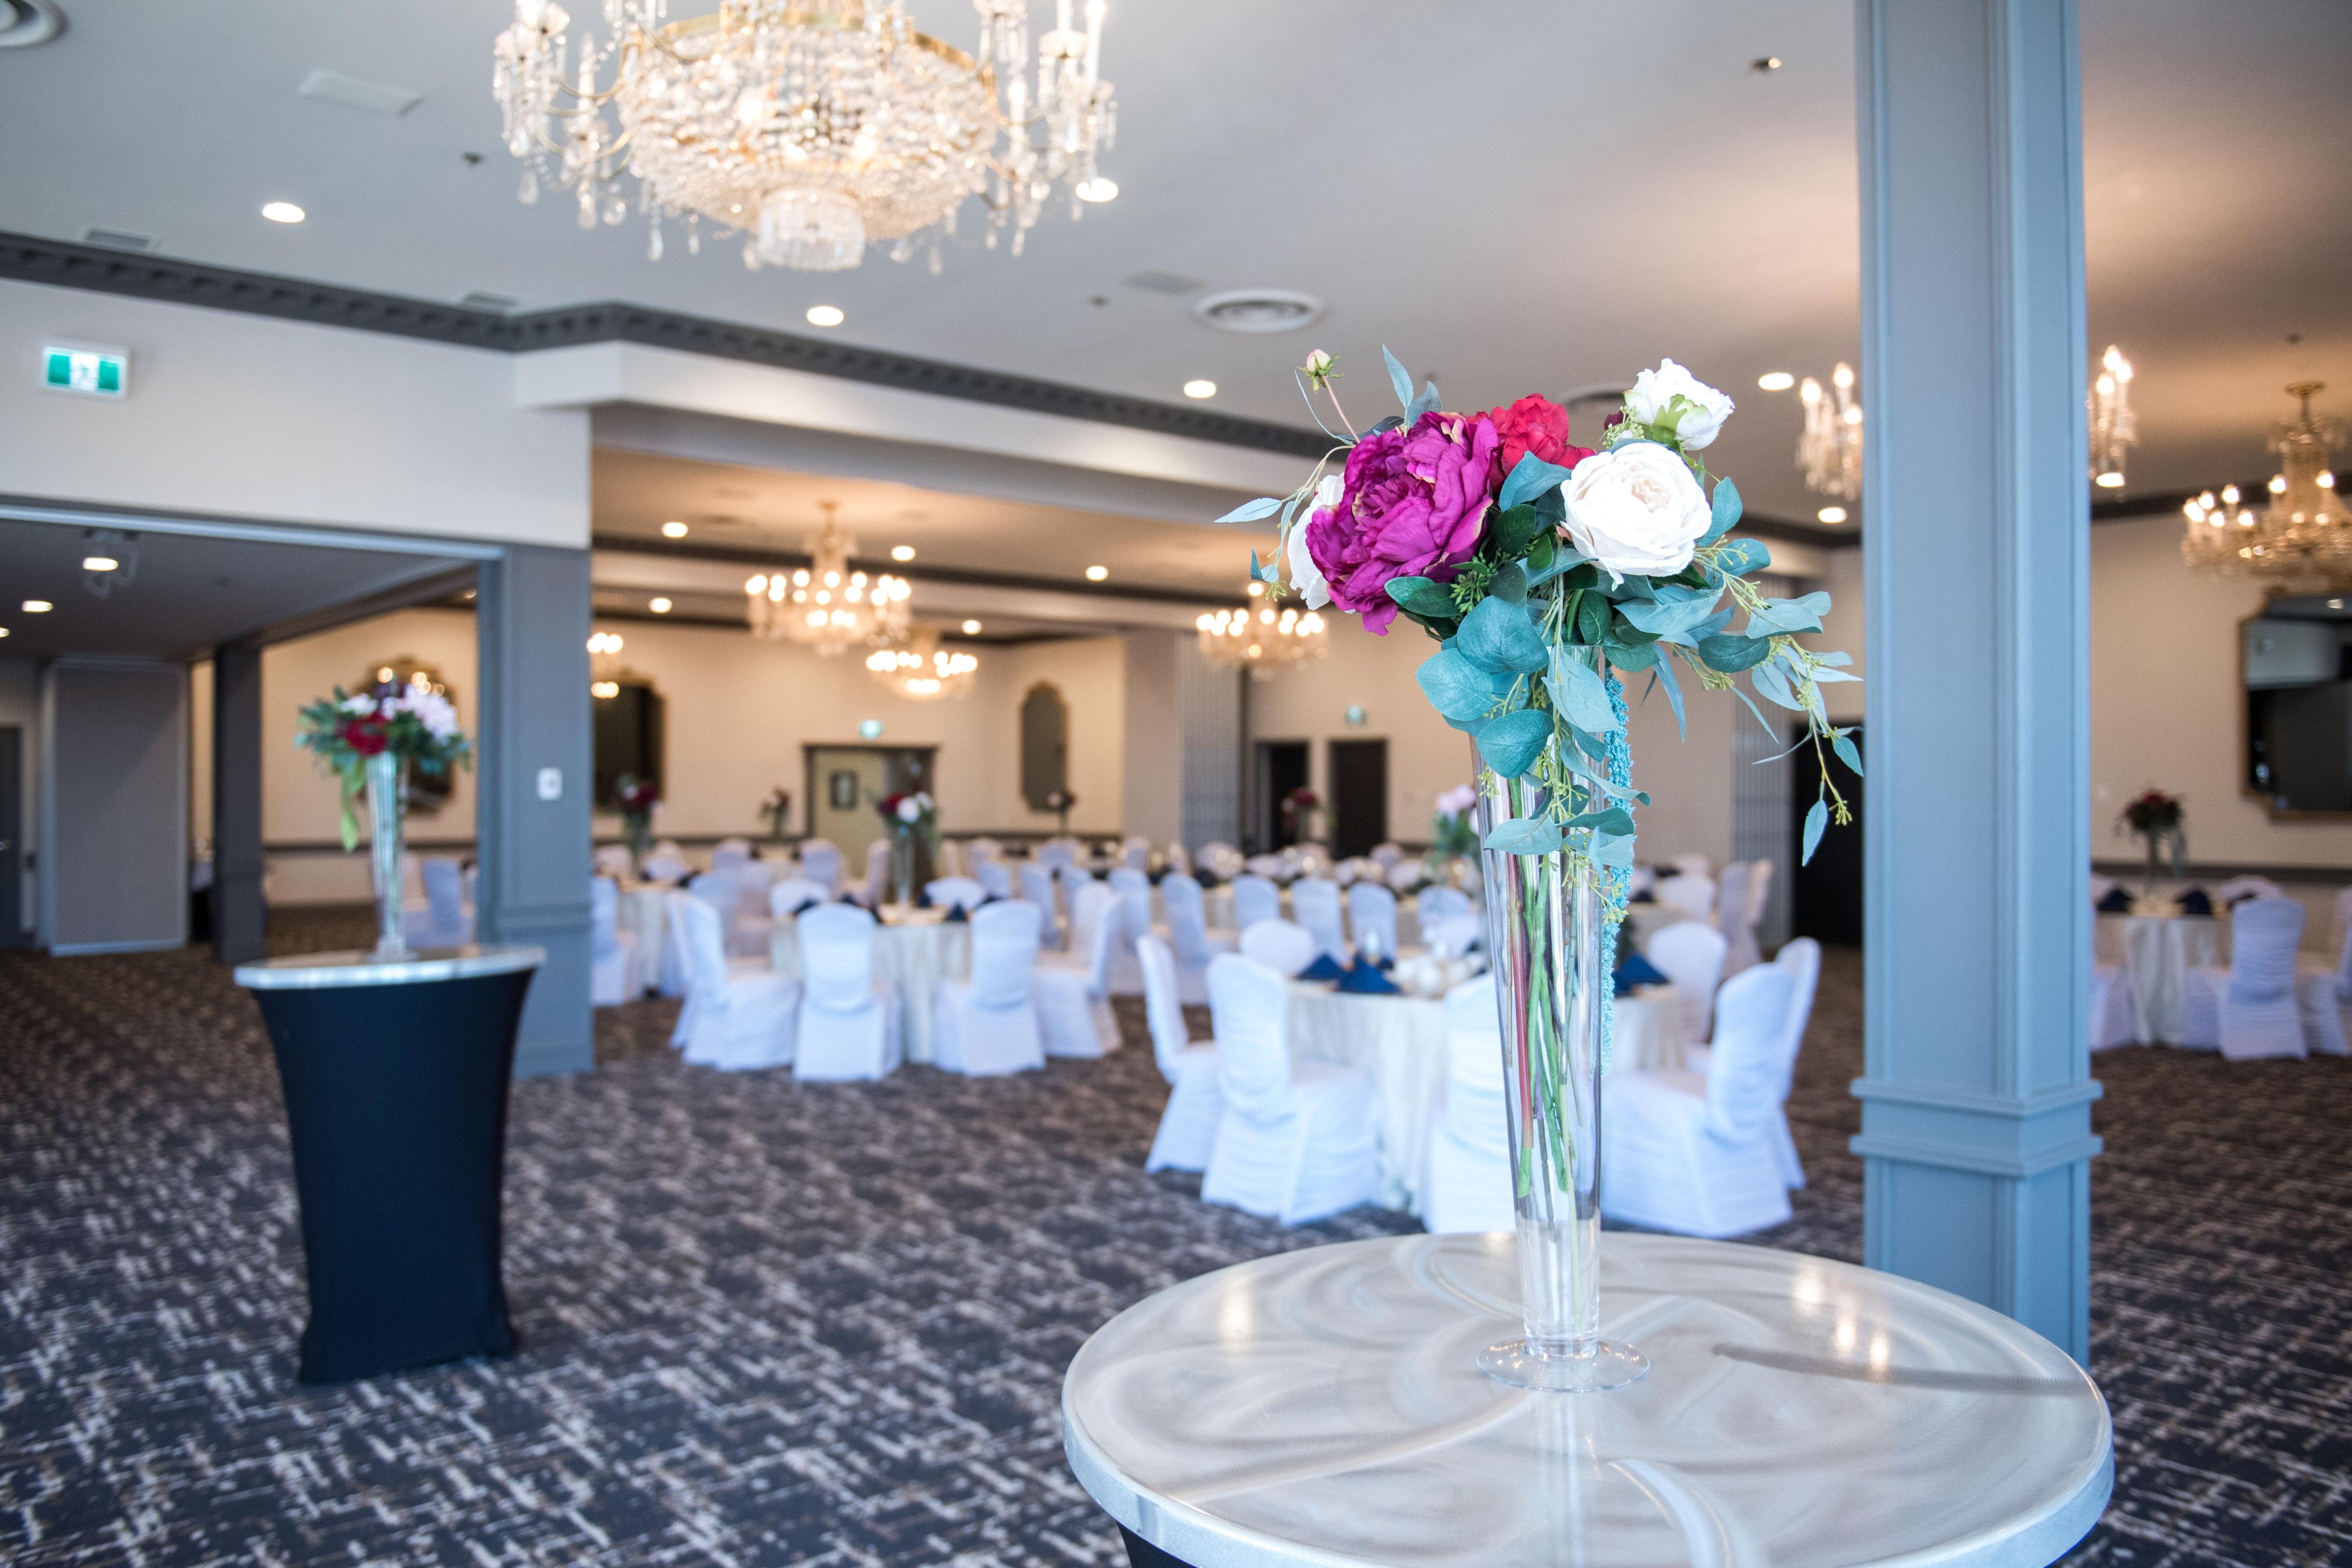 Our Ballroom is the perfect venue for any event